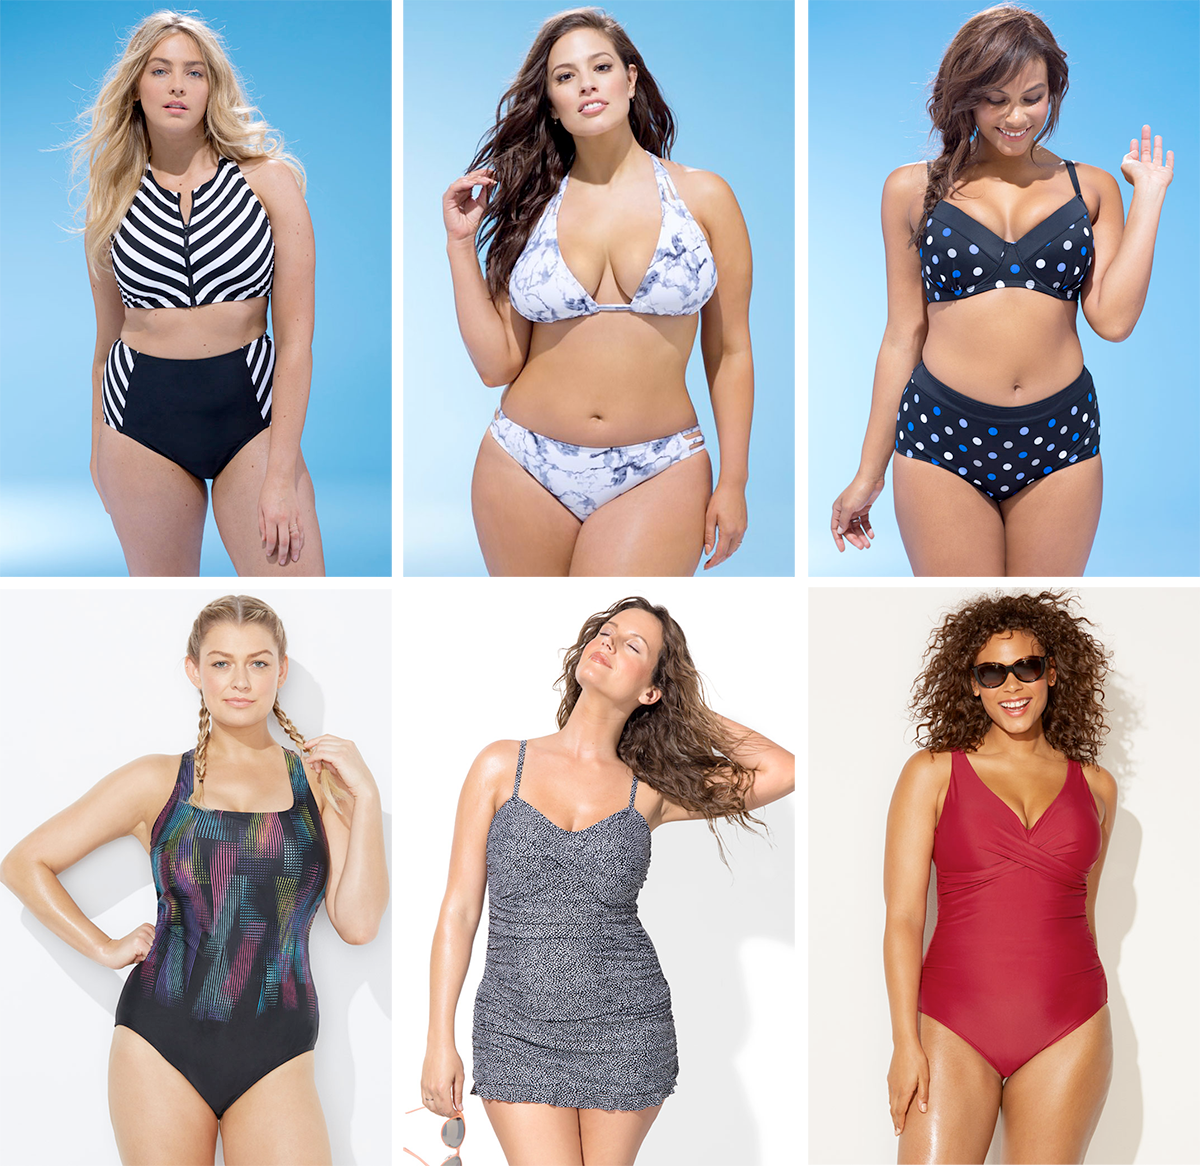 Plus size swimsuit special 2017 // Speedster Bikini, USD $53.20 from Swimsuits For All | Beach Babe Marble Bikini, USD $47.60 from Swimsuits For All | Director Underwire Bikini, USD $50.40 | Chlorine Resistant Litebrite X-Back Swimsuit, USD $46.20 from Swimsuits For All | Bedrock Ruffle Swimdress, USD $54.60 from Swimsuits For All | Sangria V-Neck Swimsuit, USD $50.40 from Swimsuits For All